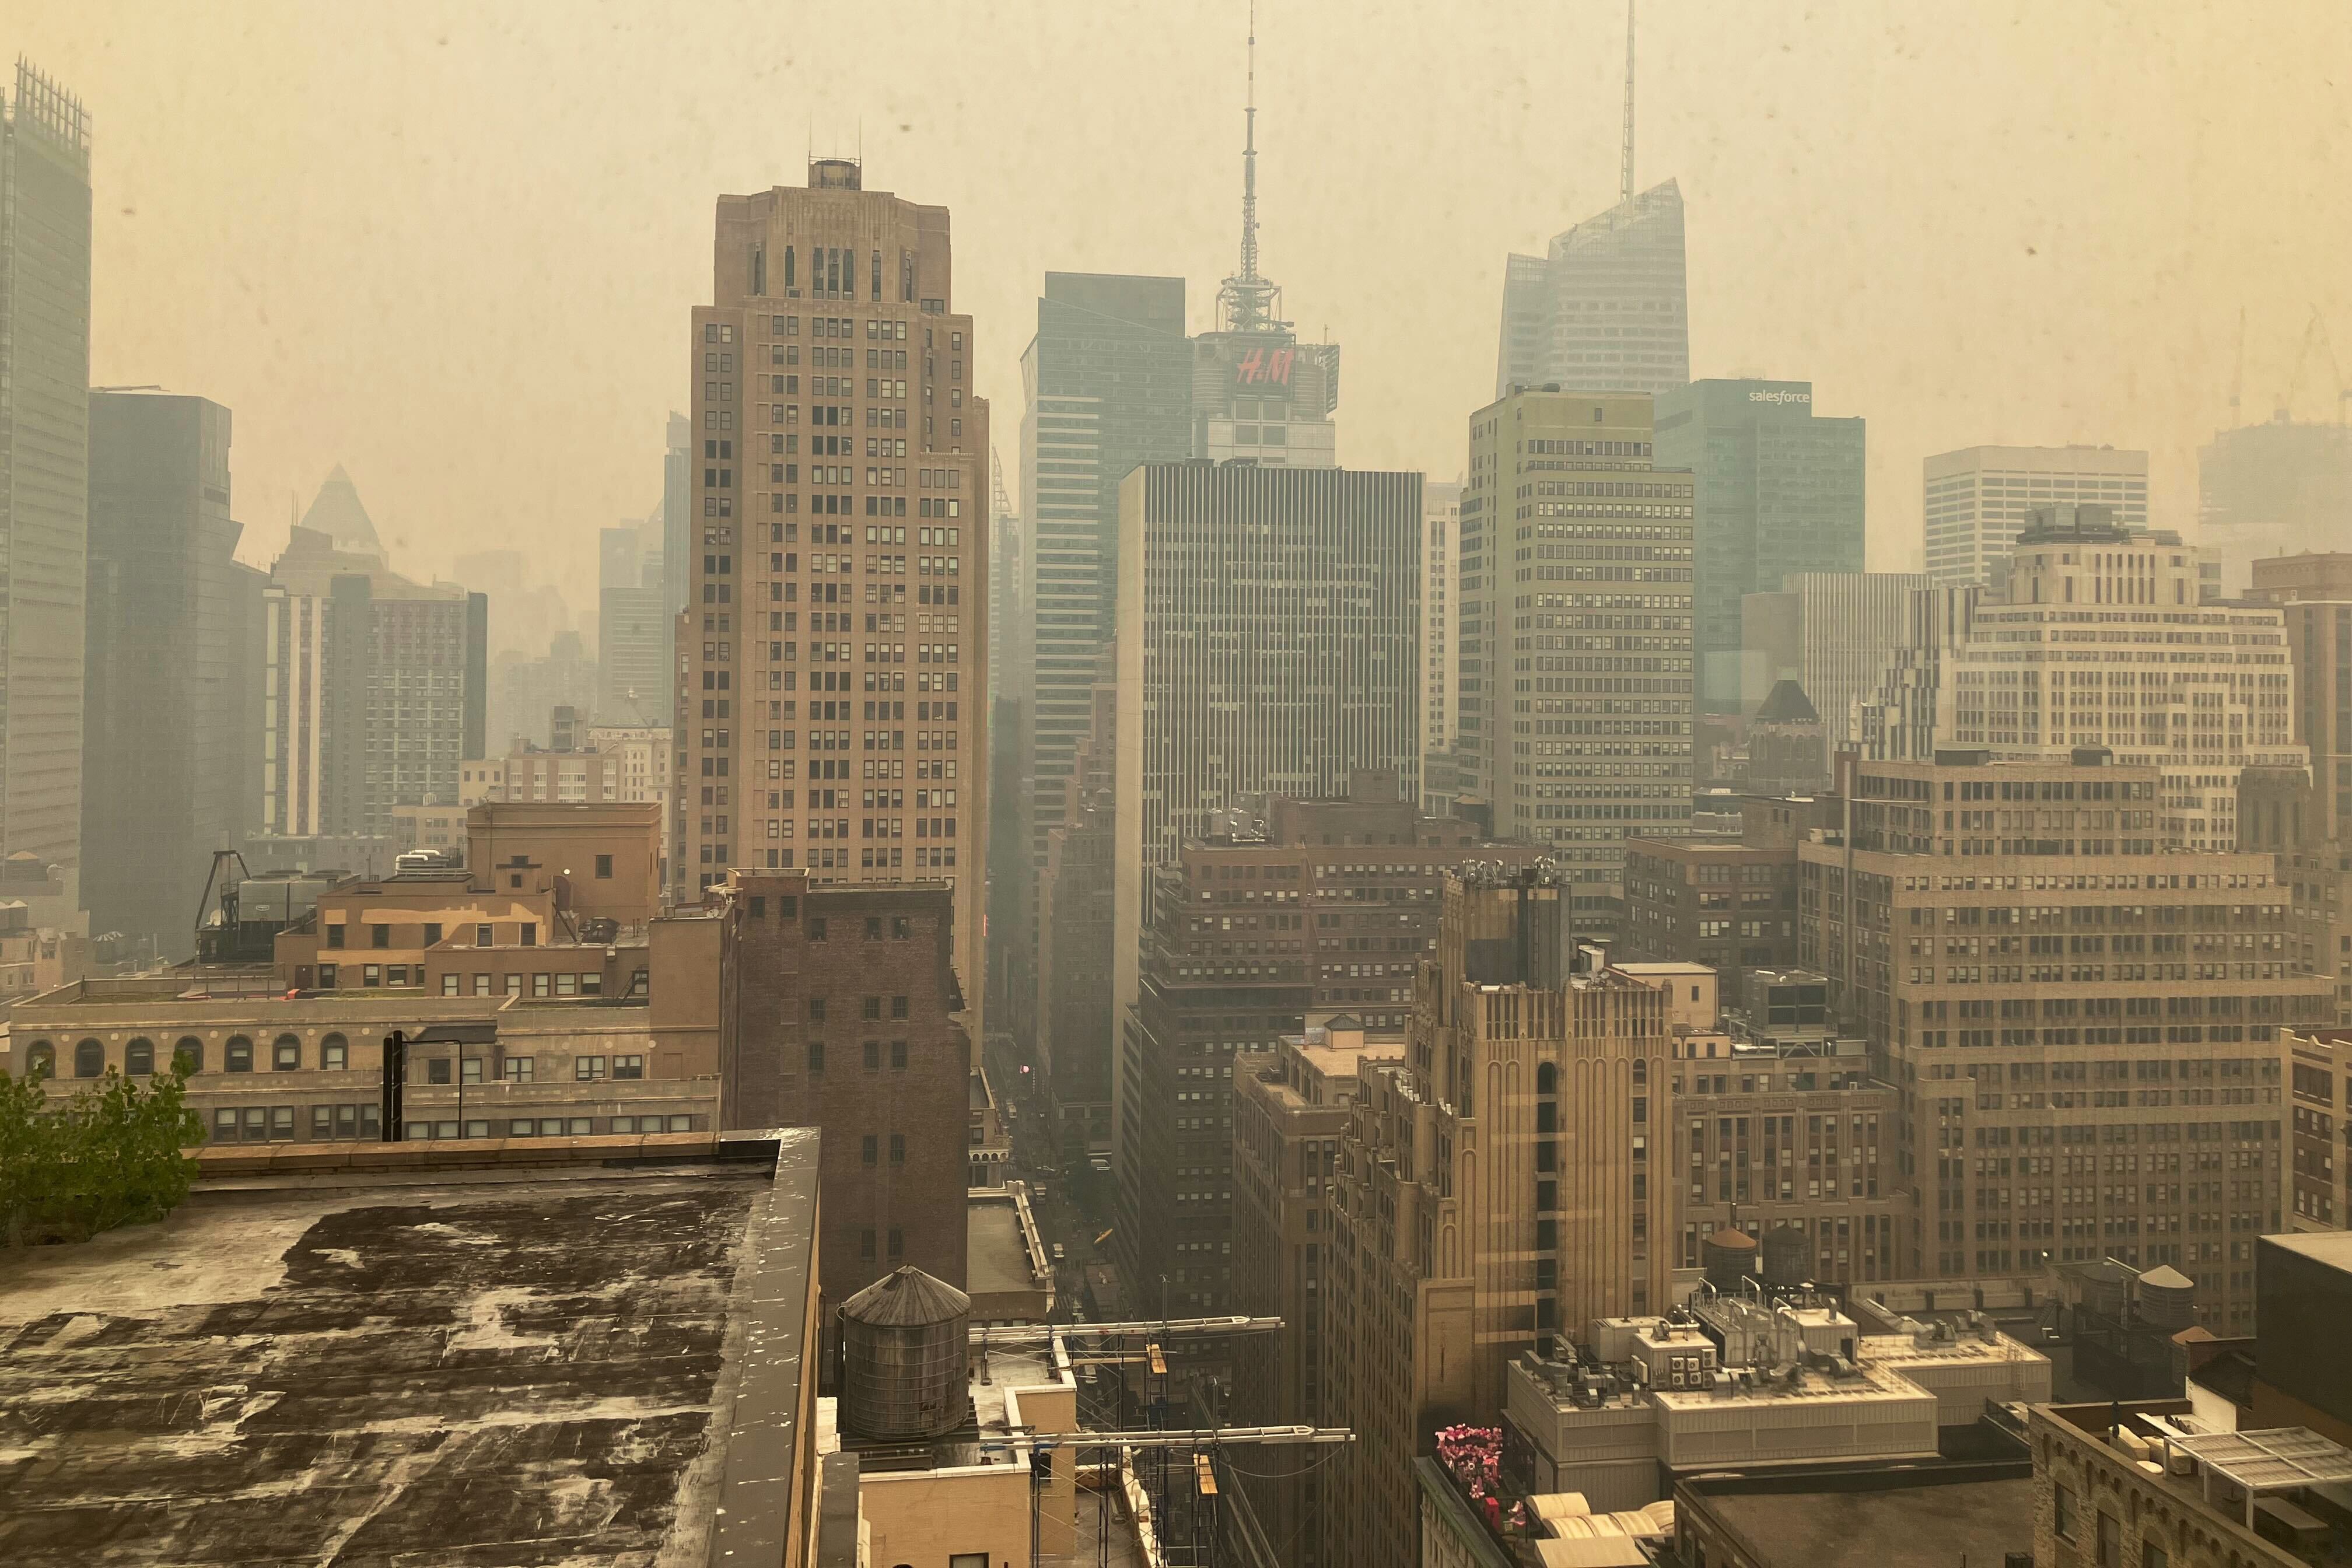 The Midtown Manhattan skyline looks yellowish-brown because of air quality issues.